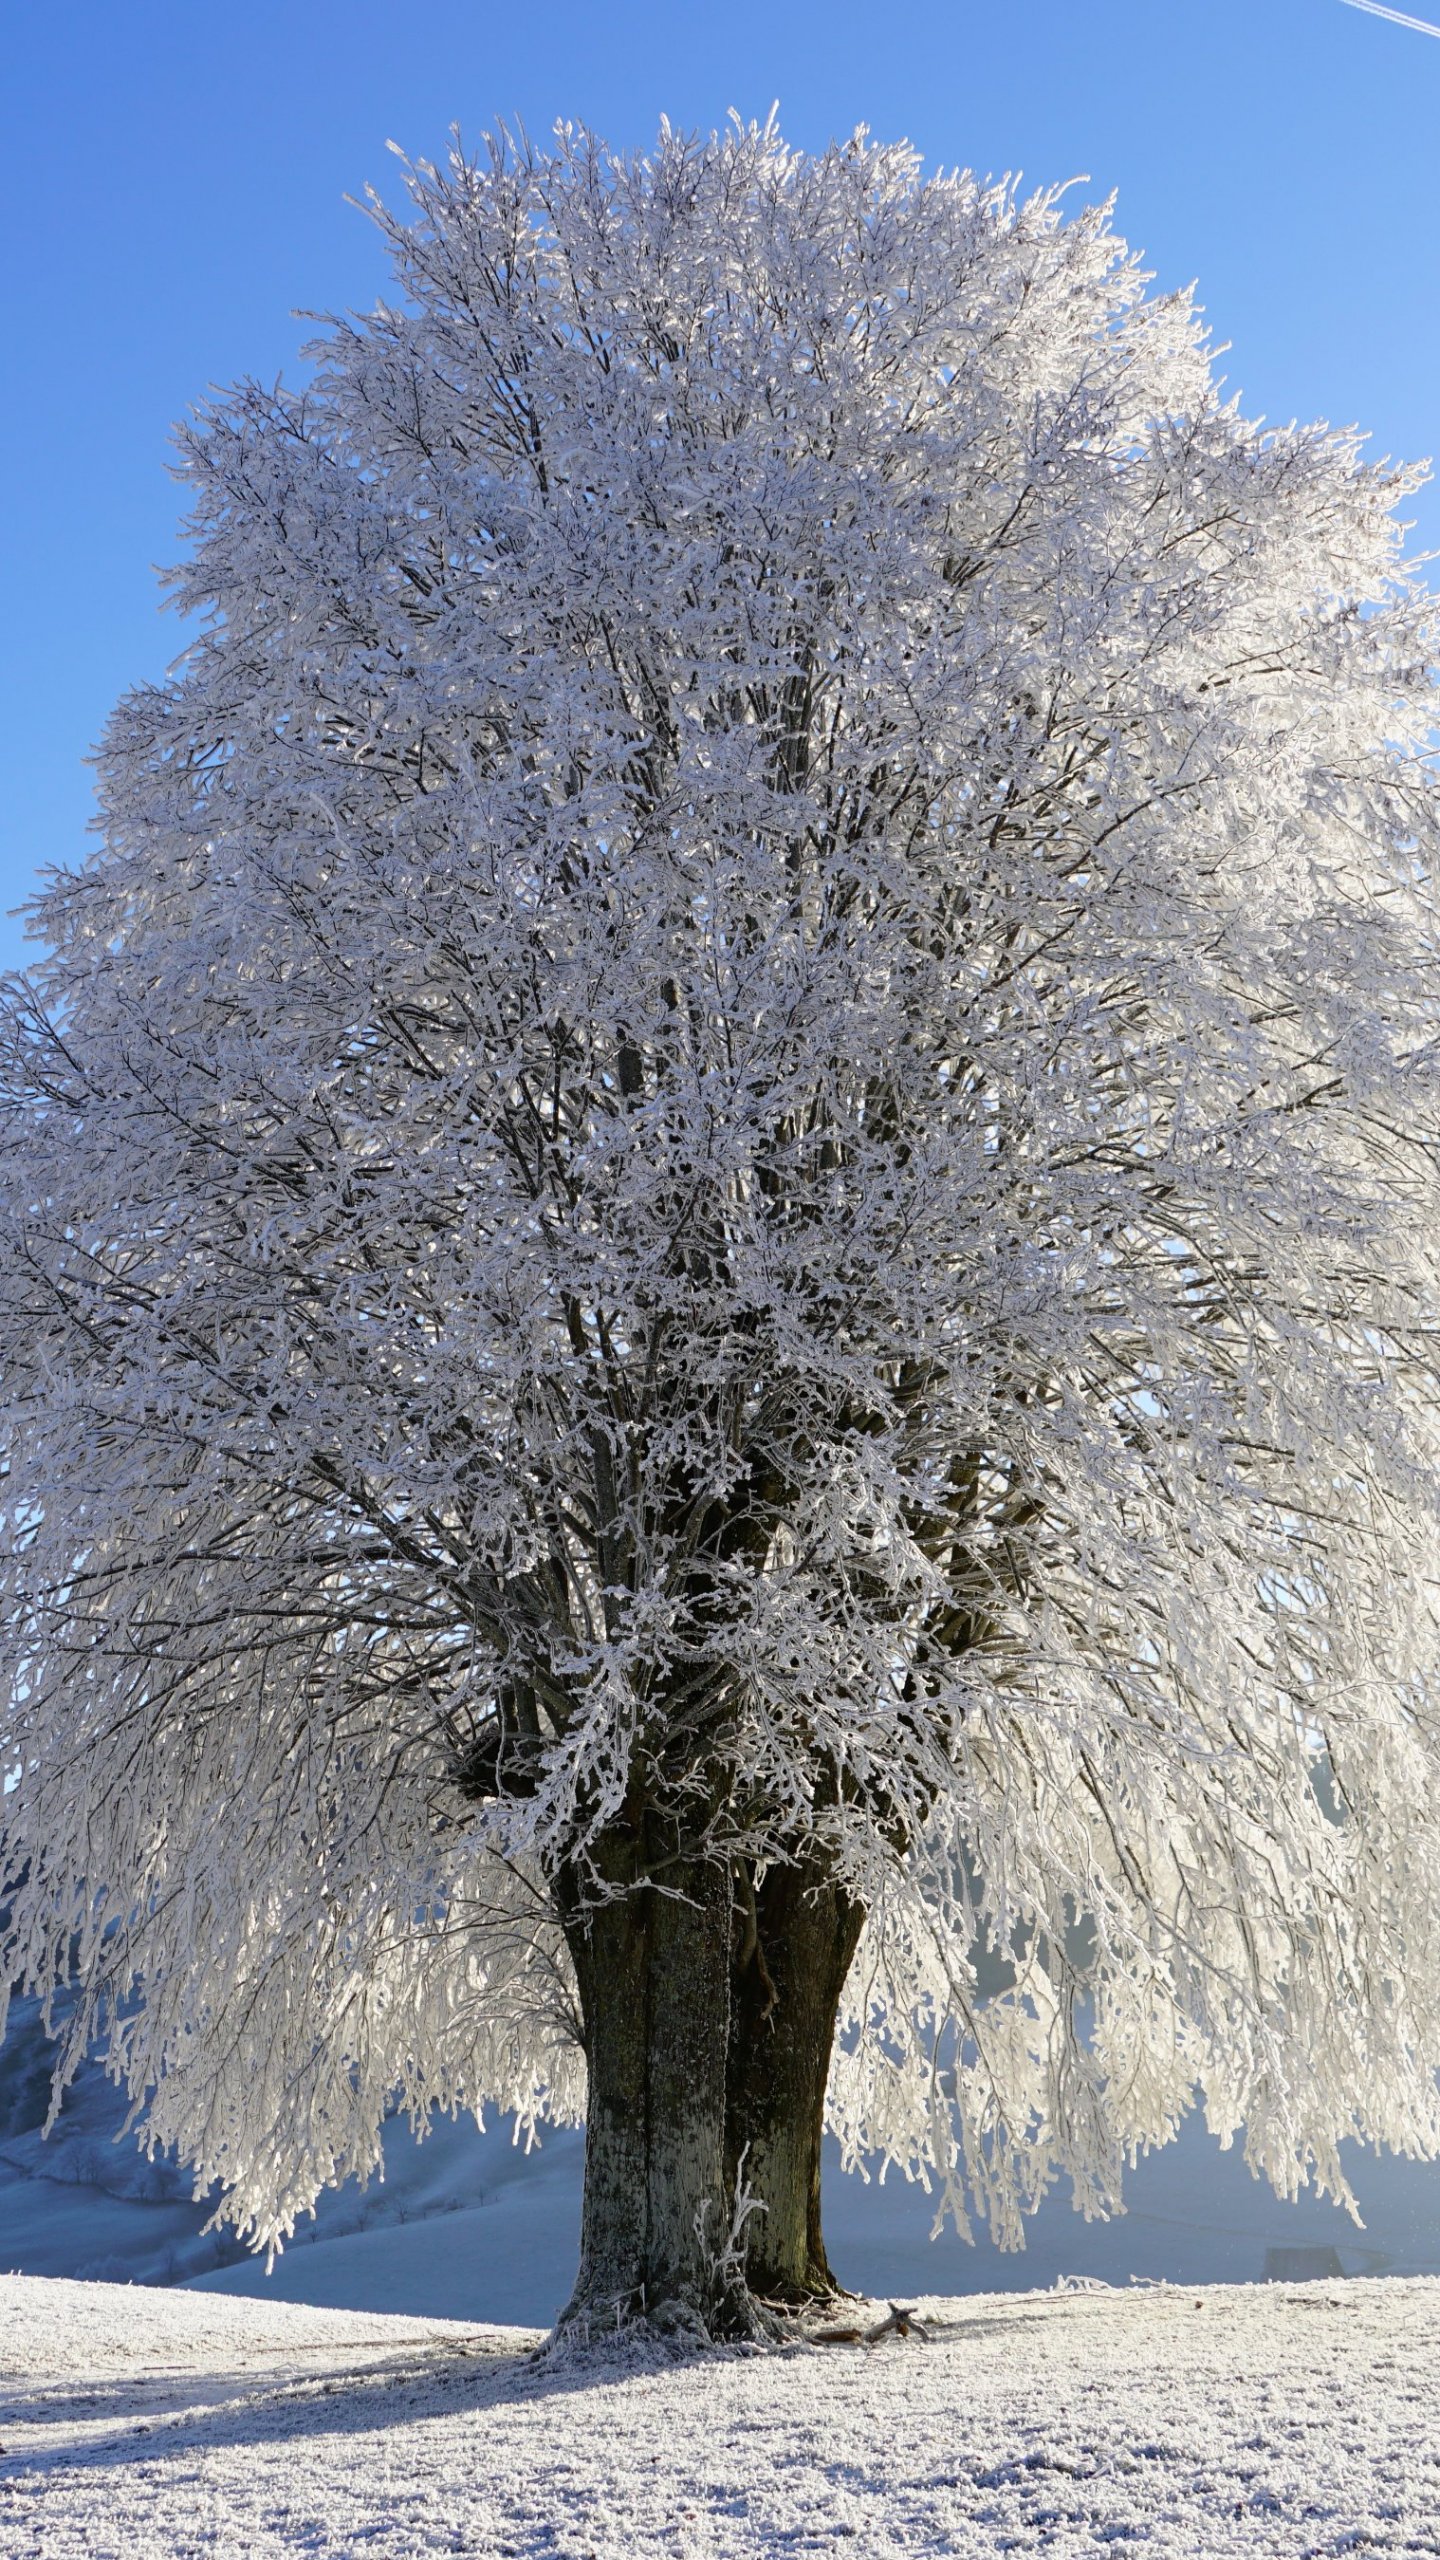 Tree in Snow Wallpaper, Android & Desktop Background